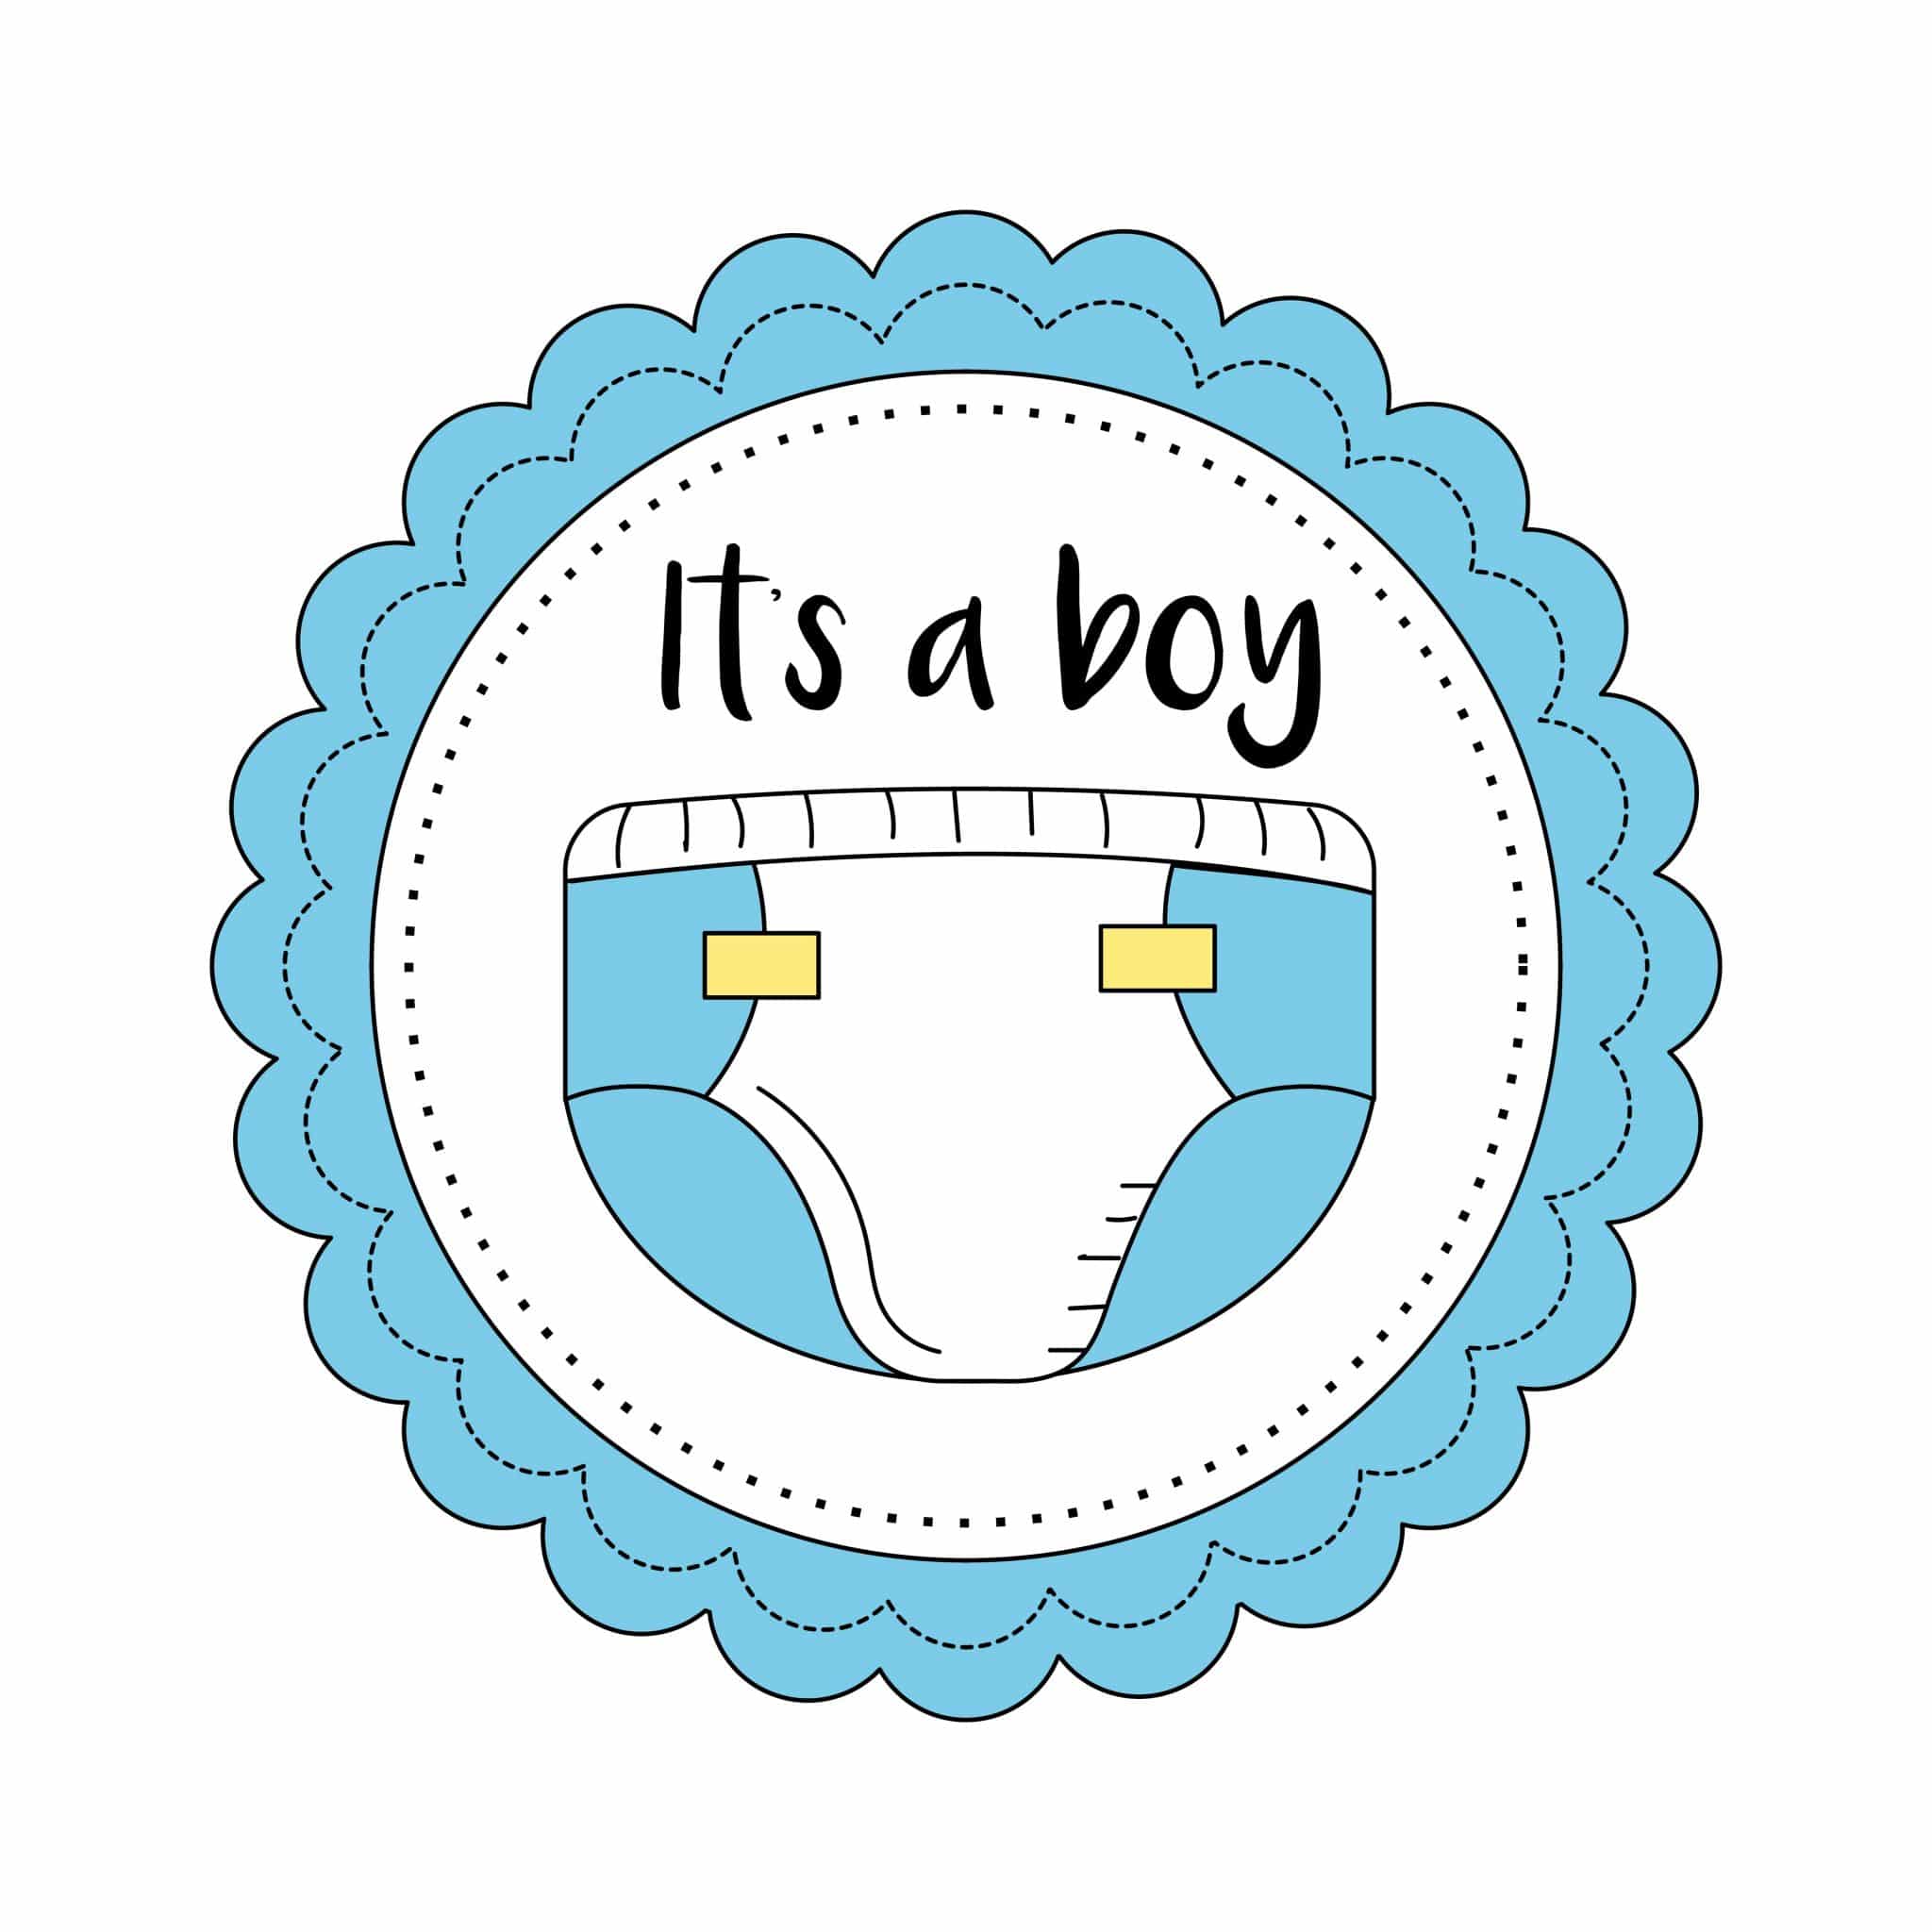 Baby boy shower stickers Royalty Free Vector Image